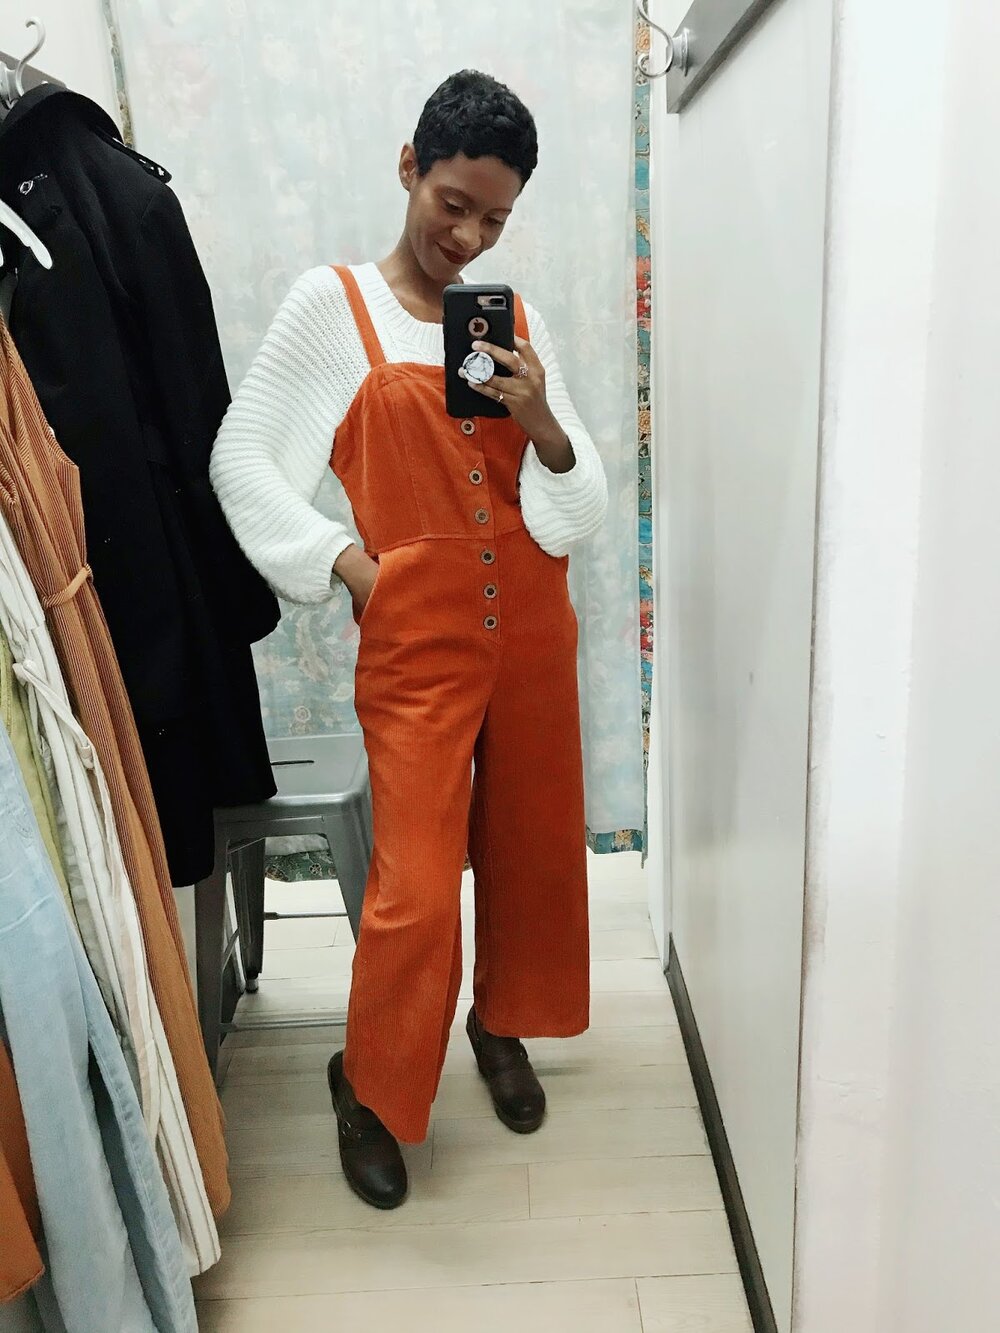 A Cute Try On Haul Of All Of The Jumpsuits I Want To Buy!